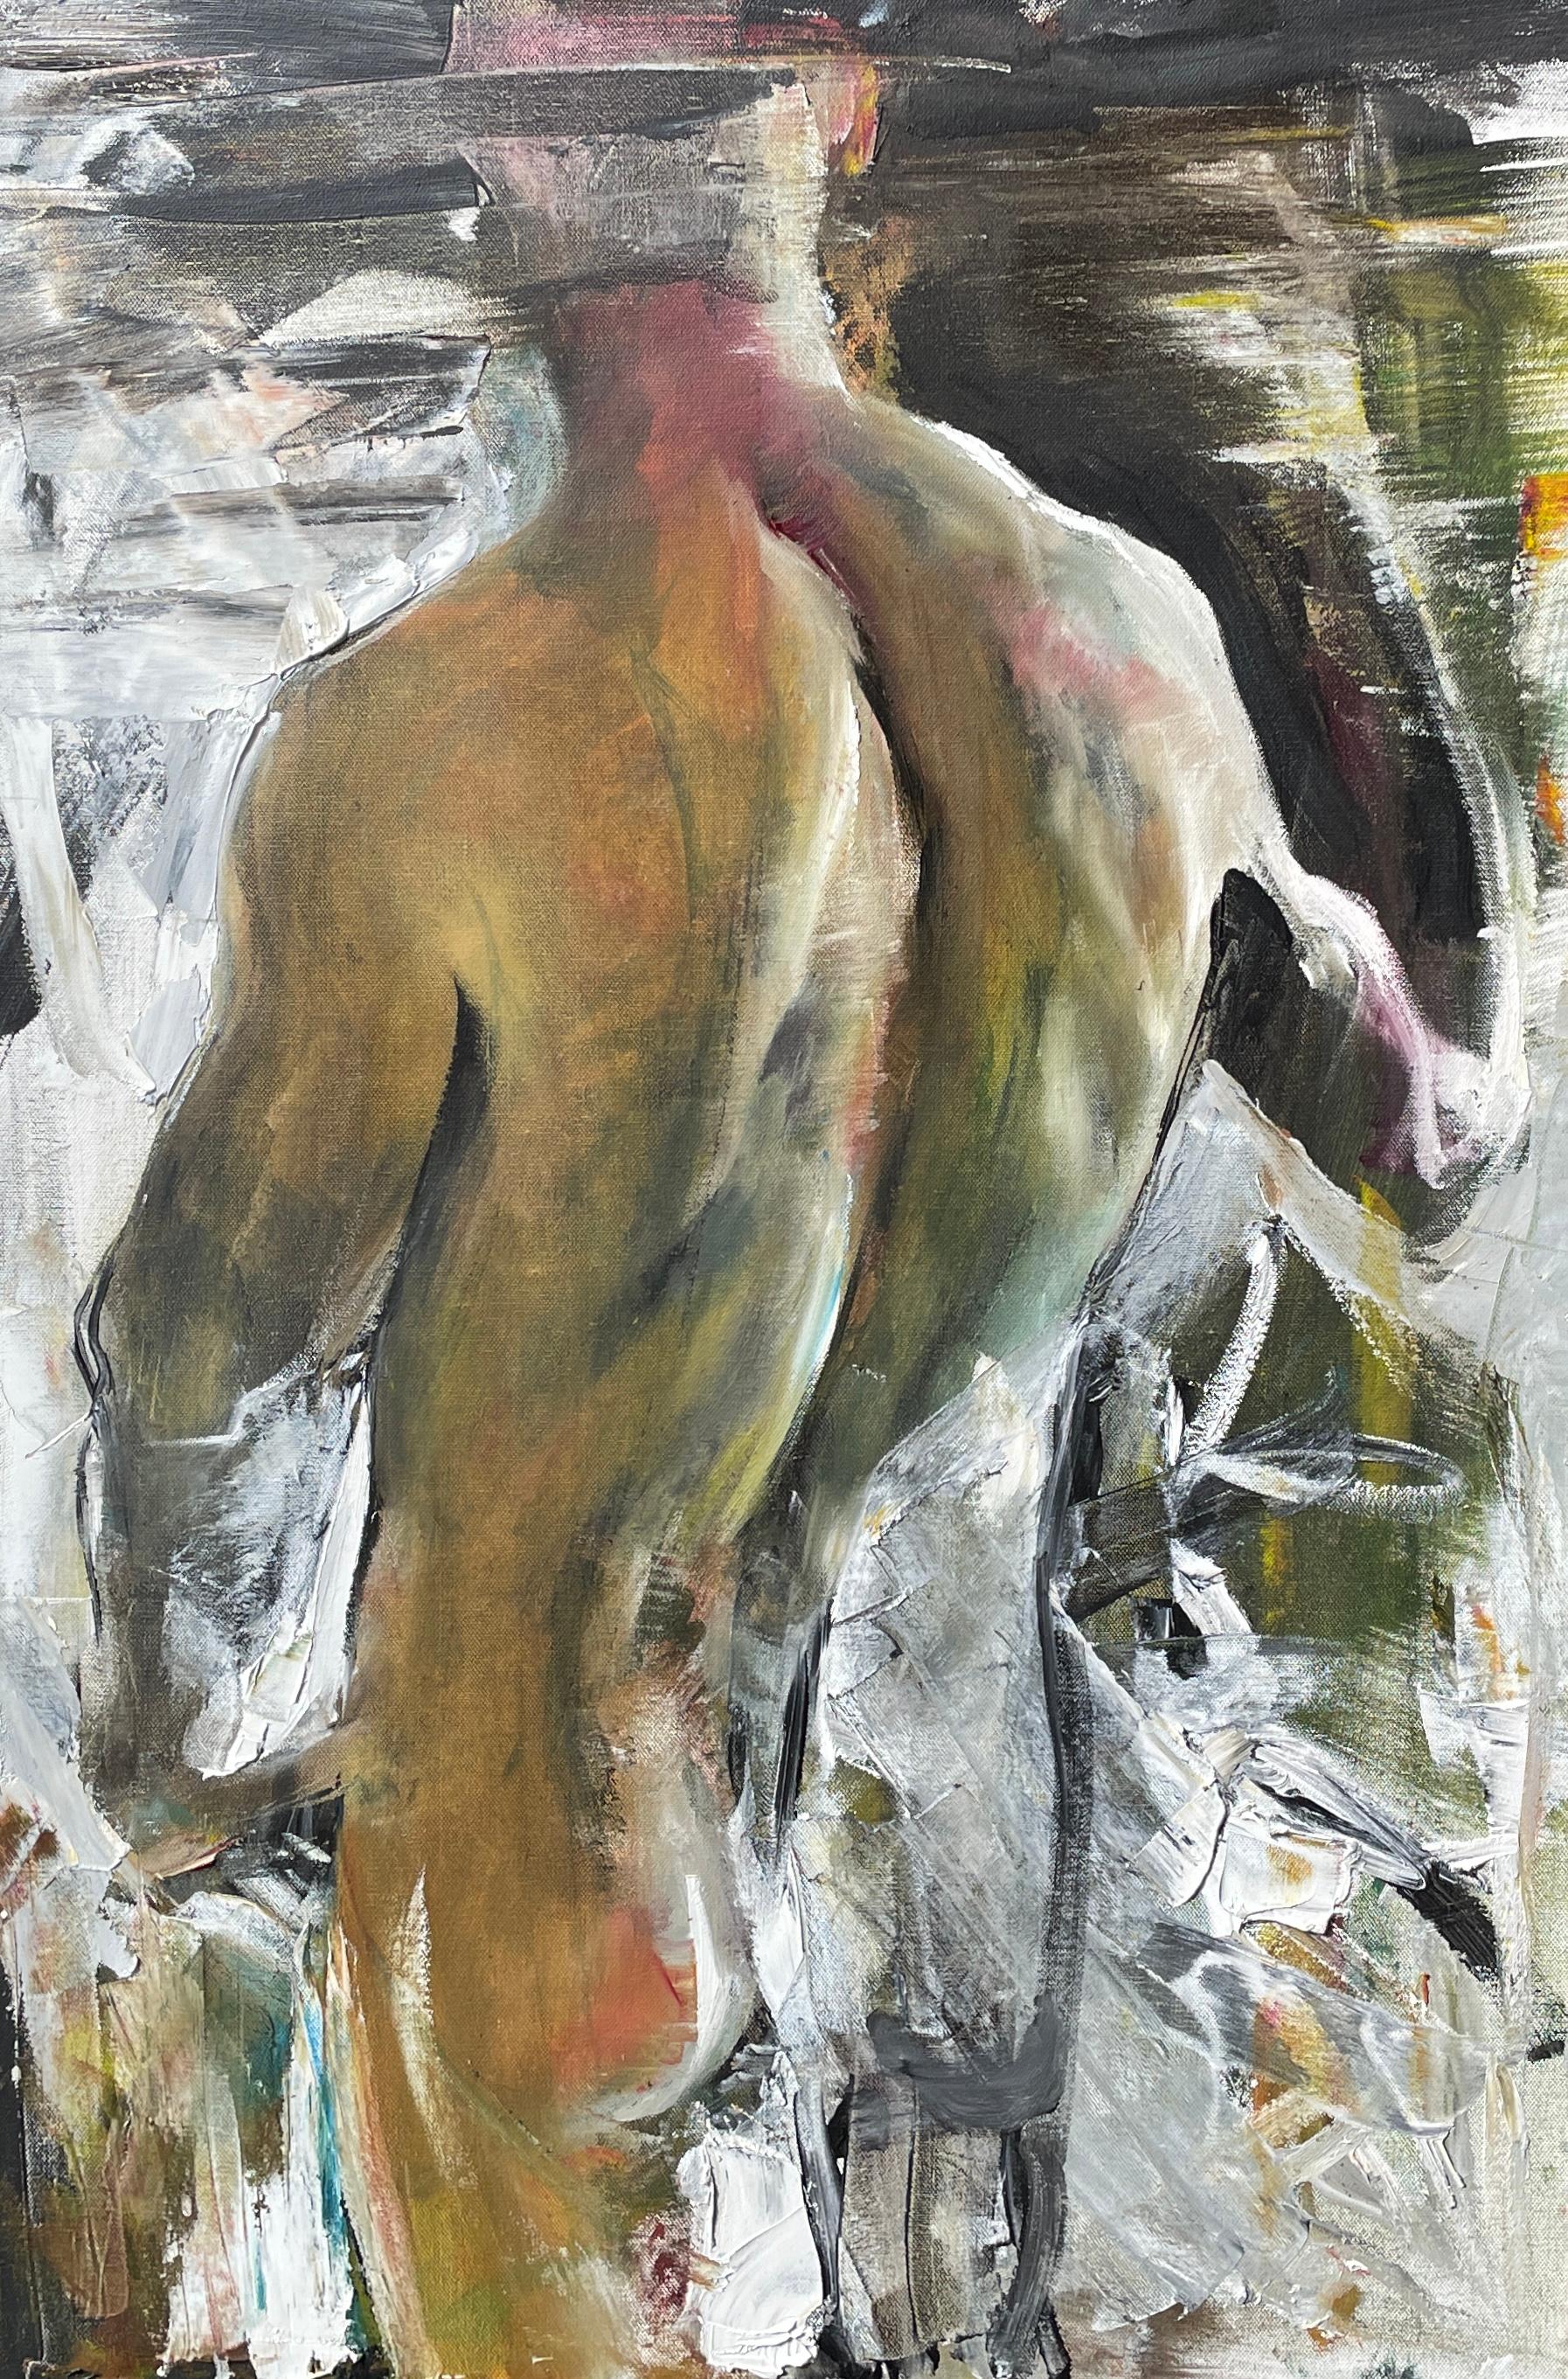 
"Male Curve" is an evocative 36" x 24" oil painting by Ukrainian artist Natalia Aandewiel that captures the essence of masculine grace. Rendered with a raw, earthy palette, the composition uses rich ochres, umbers, and subtle greens, creating a